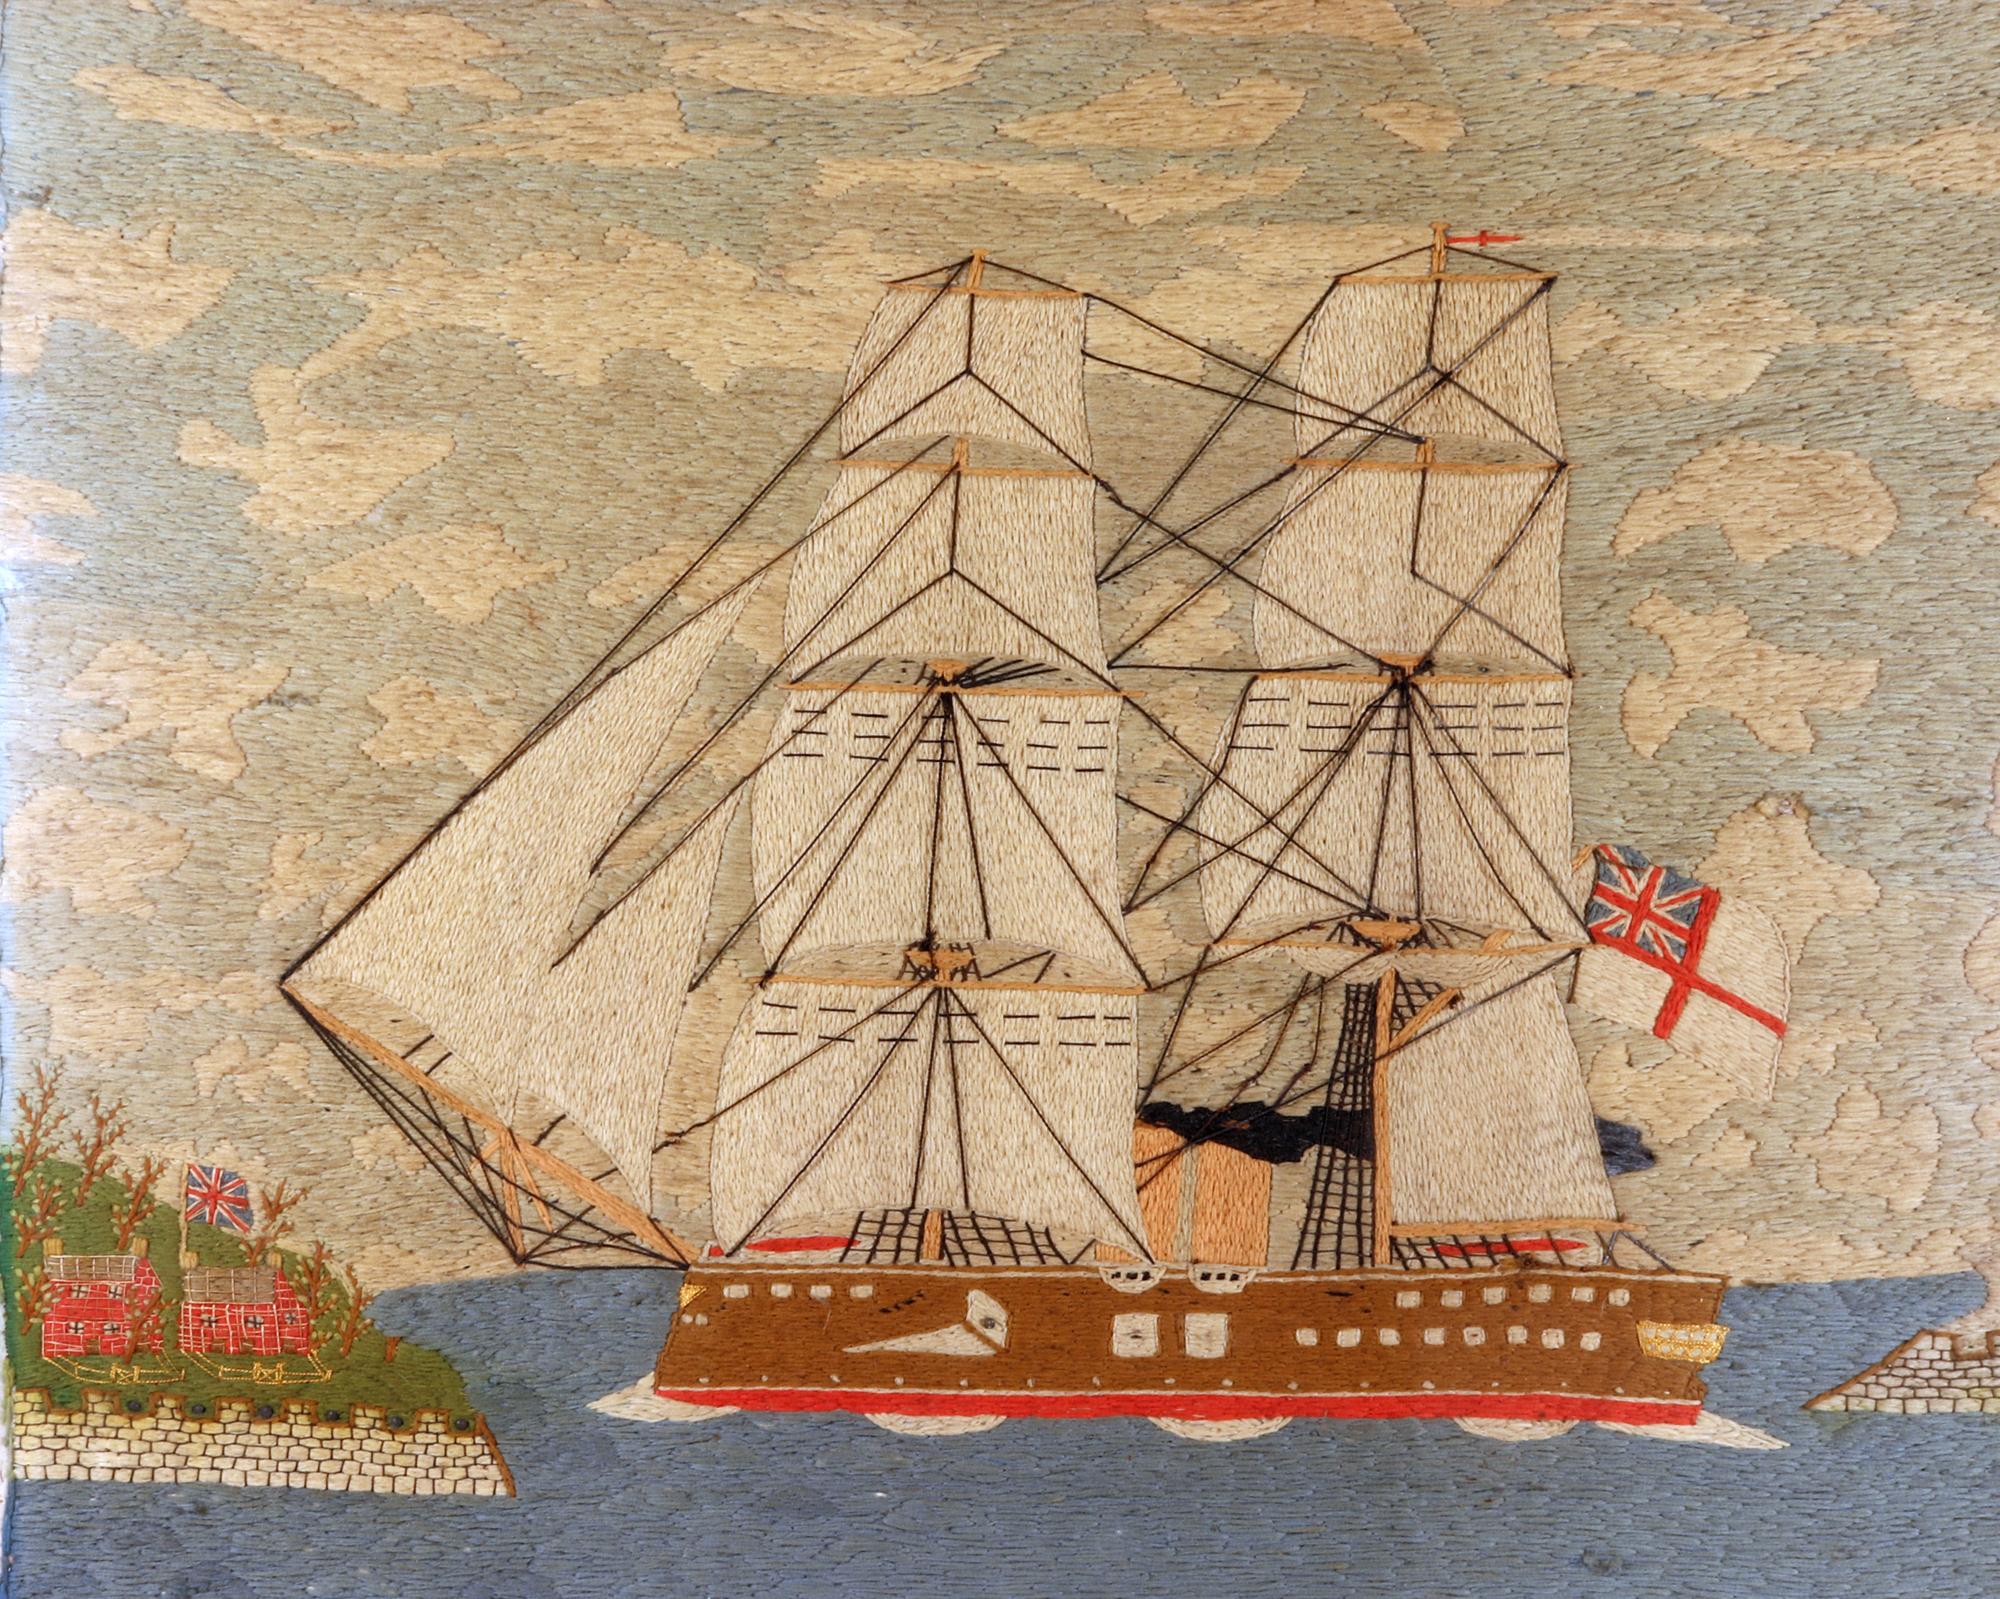 British sailor's woolwork picture of HMS Temeraire,
Circa 1880

The sailor's woolwork depicts the port side view of the Royal Navy ship H.M.S. Temeraire as she sails out to seas past a lighthouse on her starboard side and two red-bricked houses